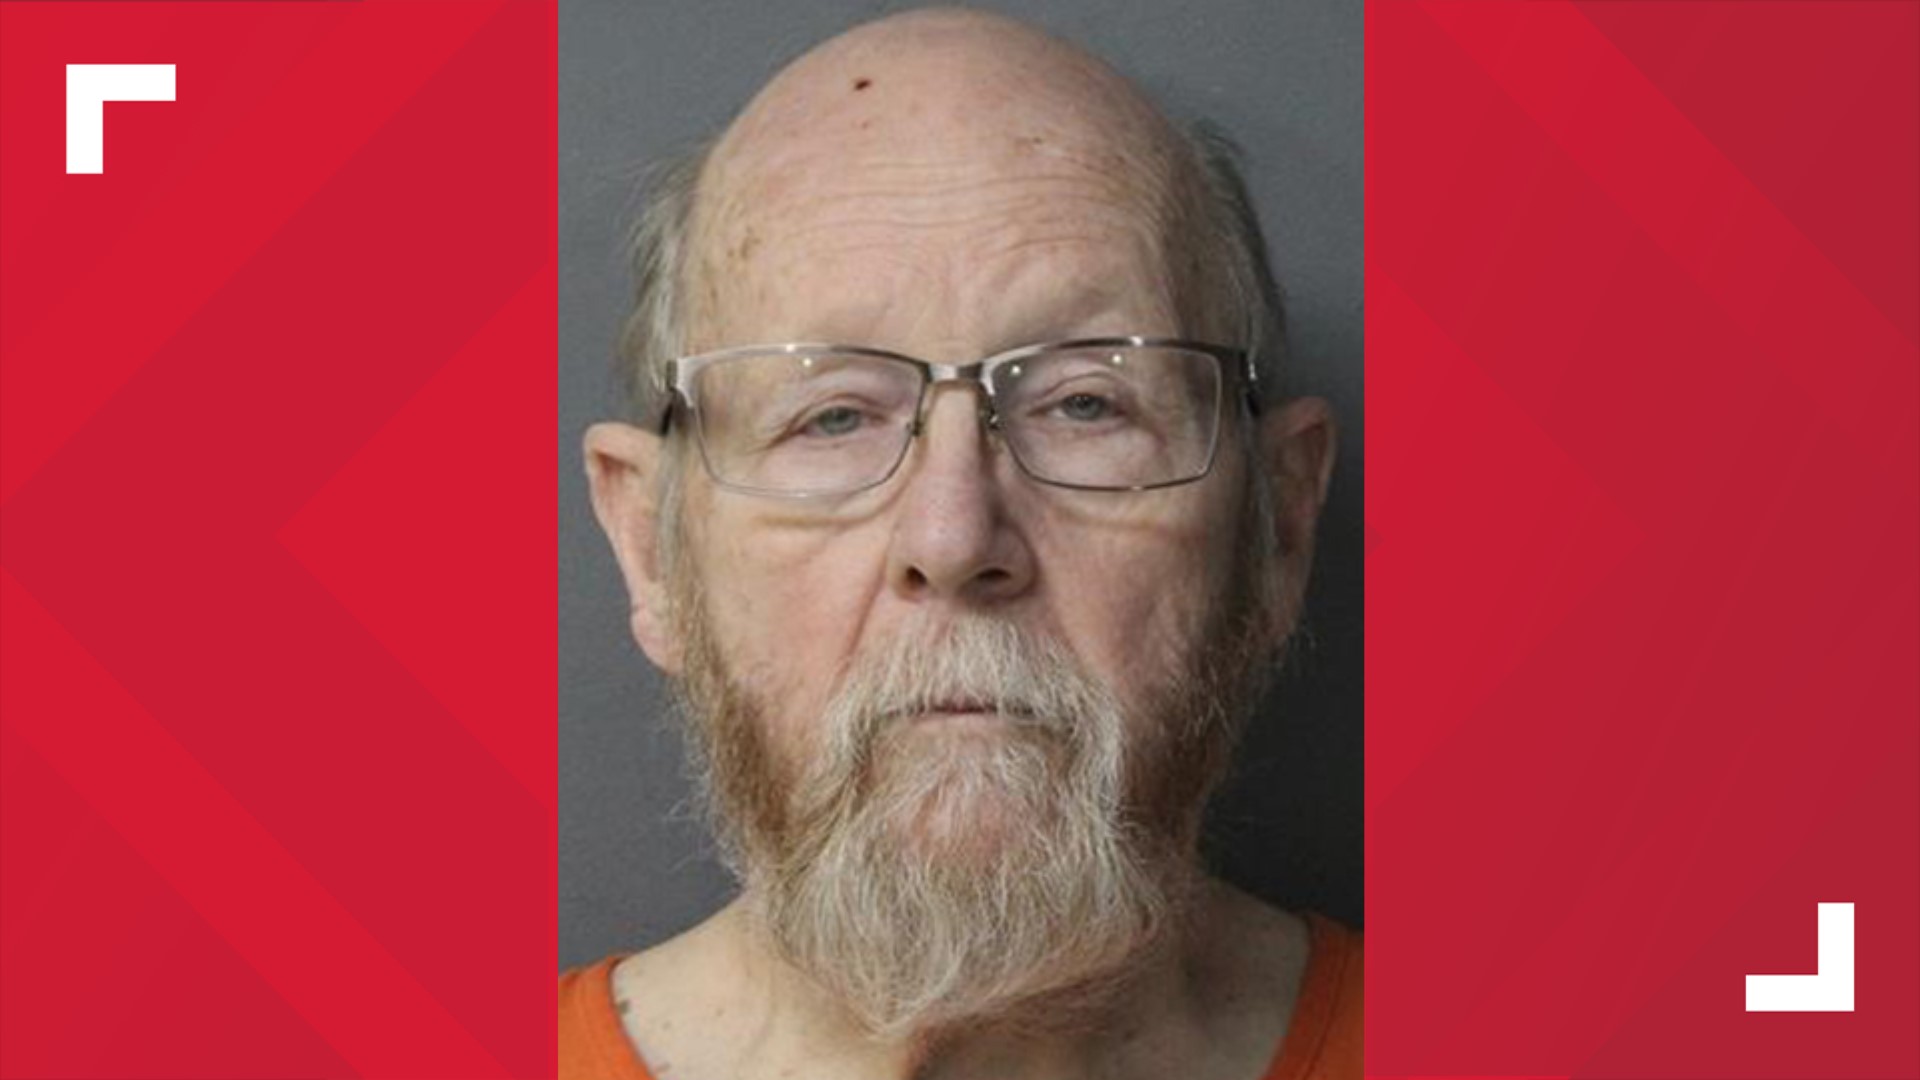 A man serving life sentences for raping and killing a Norfolk woman was sentenced to an additional 35 to 50 years in Michigan for the 1989 killing his daughter.